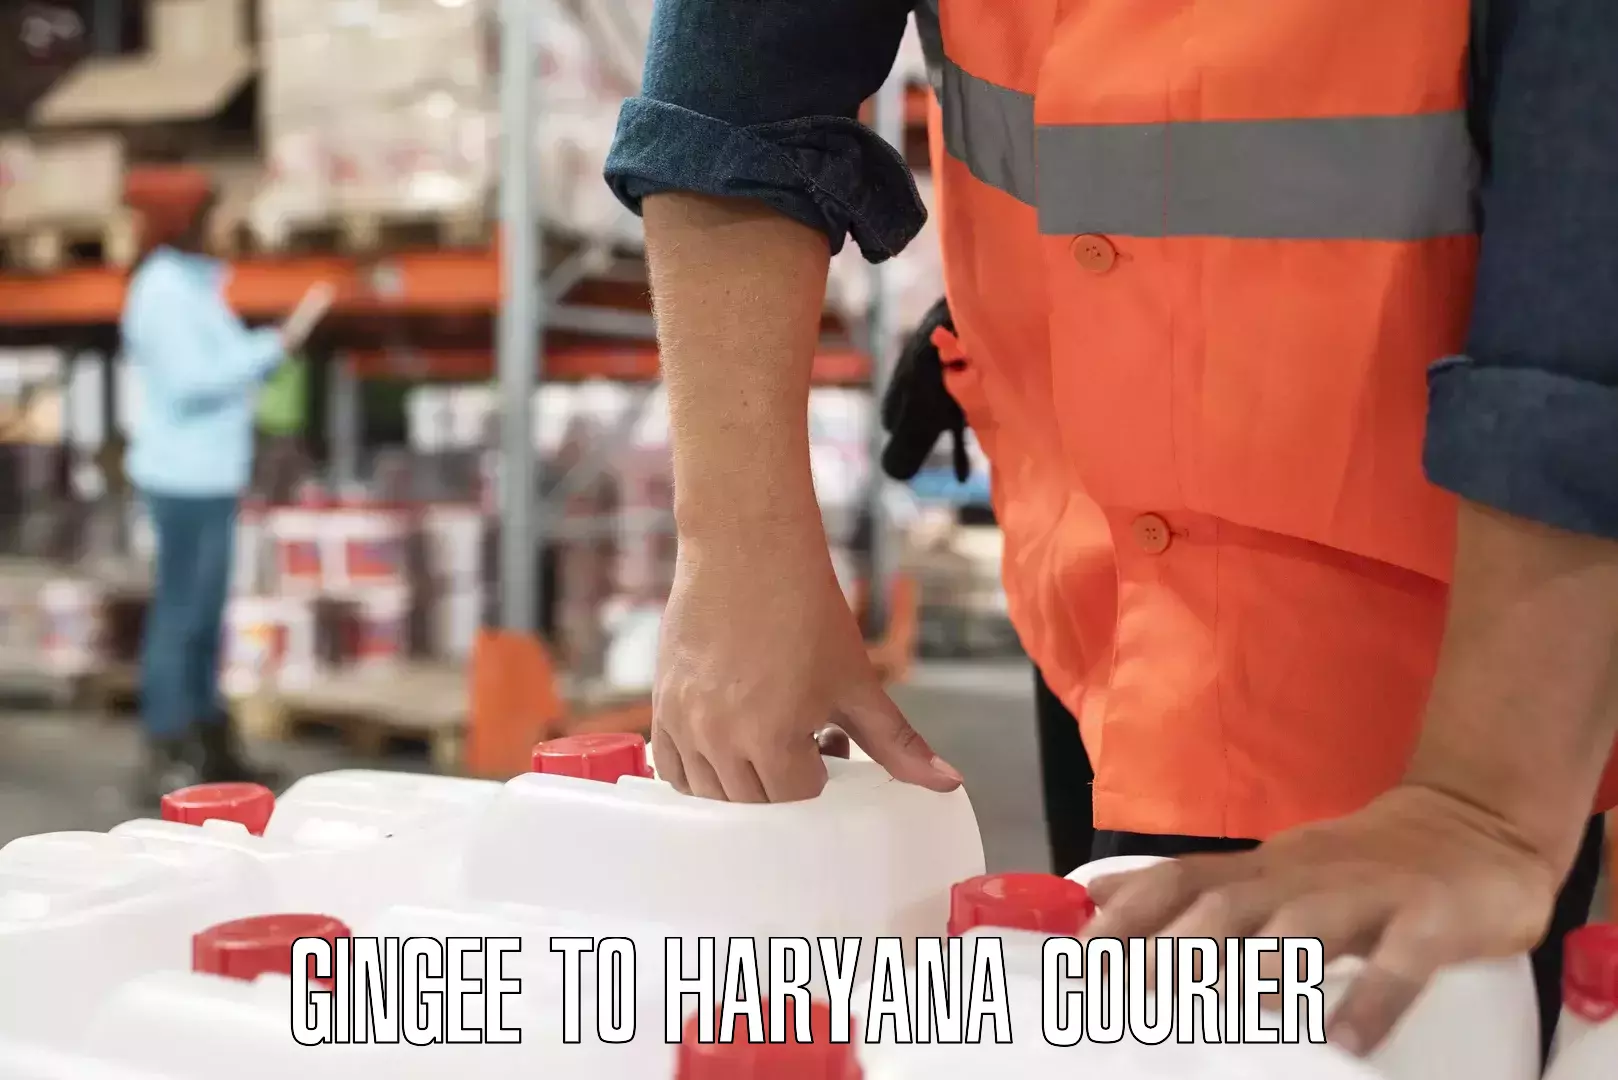 Efficient order fulfillment Gingee to Barwala